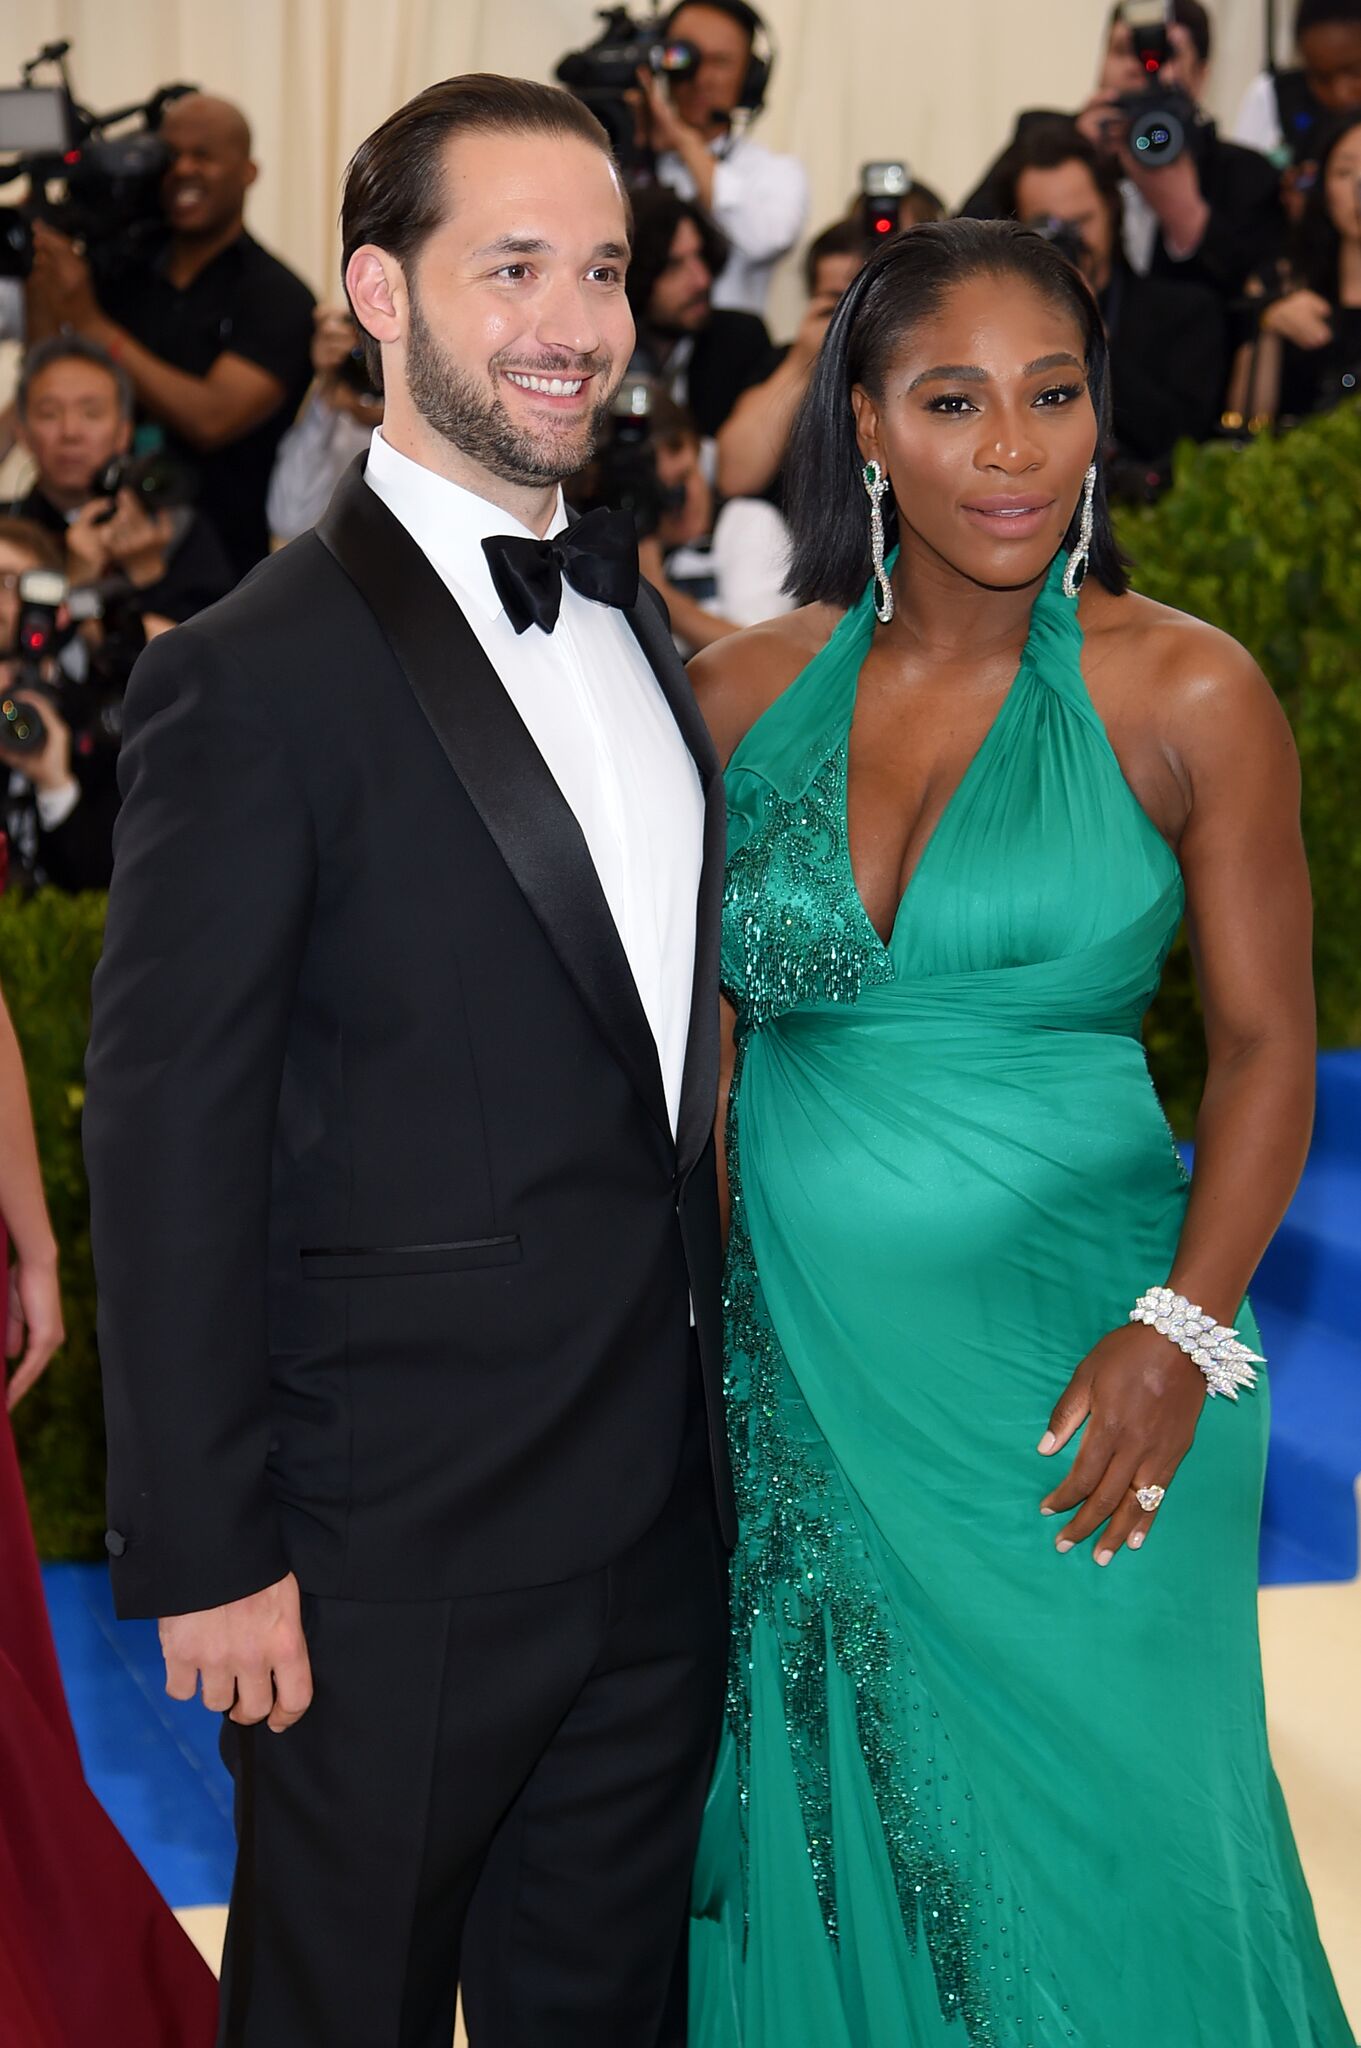 Alexis Ohanian and Serena Williams at the "Rei Kawakubo/Comme des Garcons: Art Of The In-Between" Costume Institute Gala at the Metropolitan Museum of Art on May 1, 2017 | Photo: Getty Images